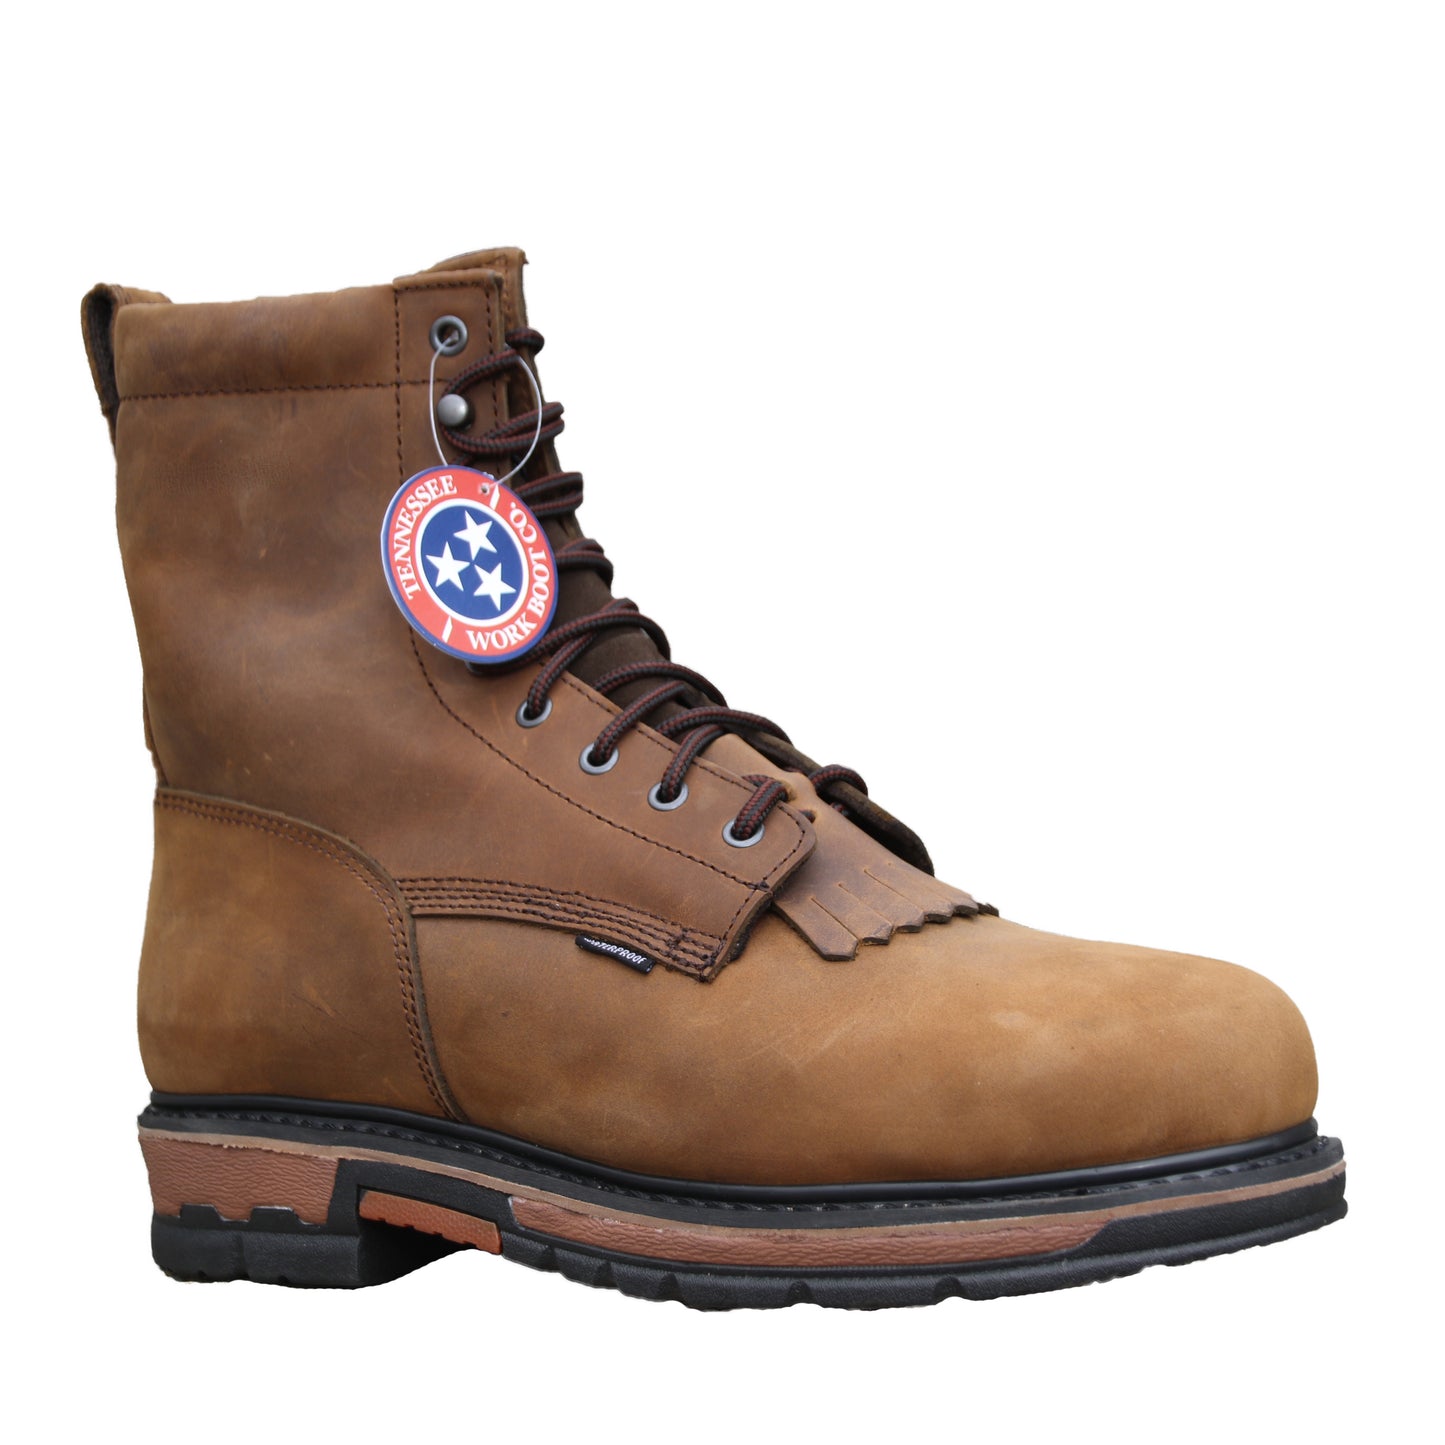 TN Work Boot Co. Men's Lace-Up Boot